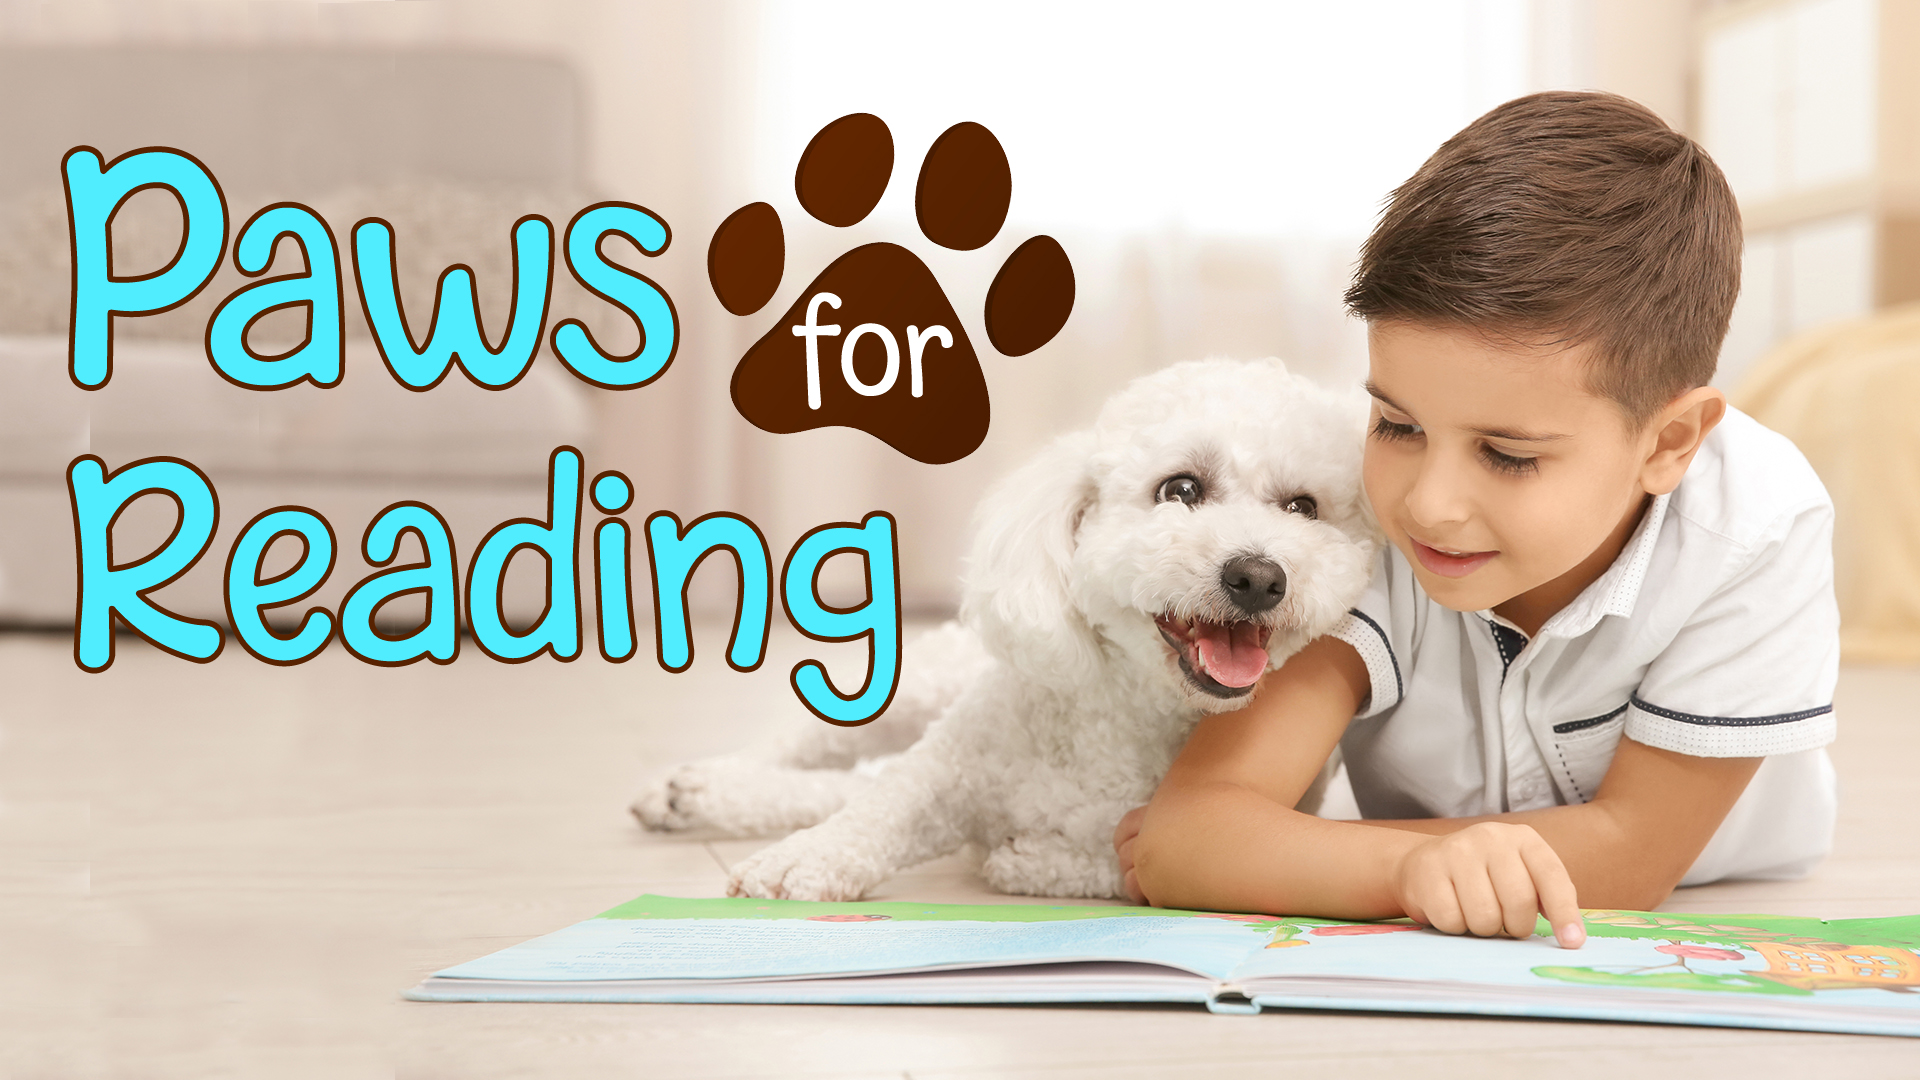 Image reads "Paws for Reading" on a background of a child reading to a dog. 